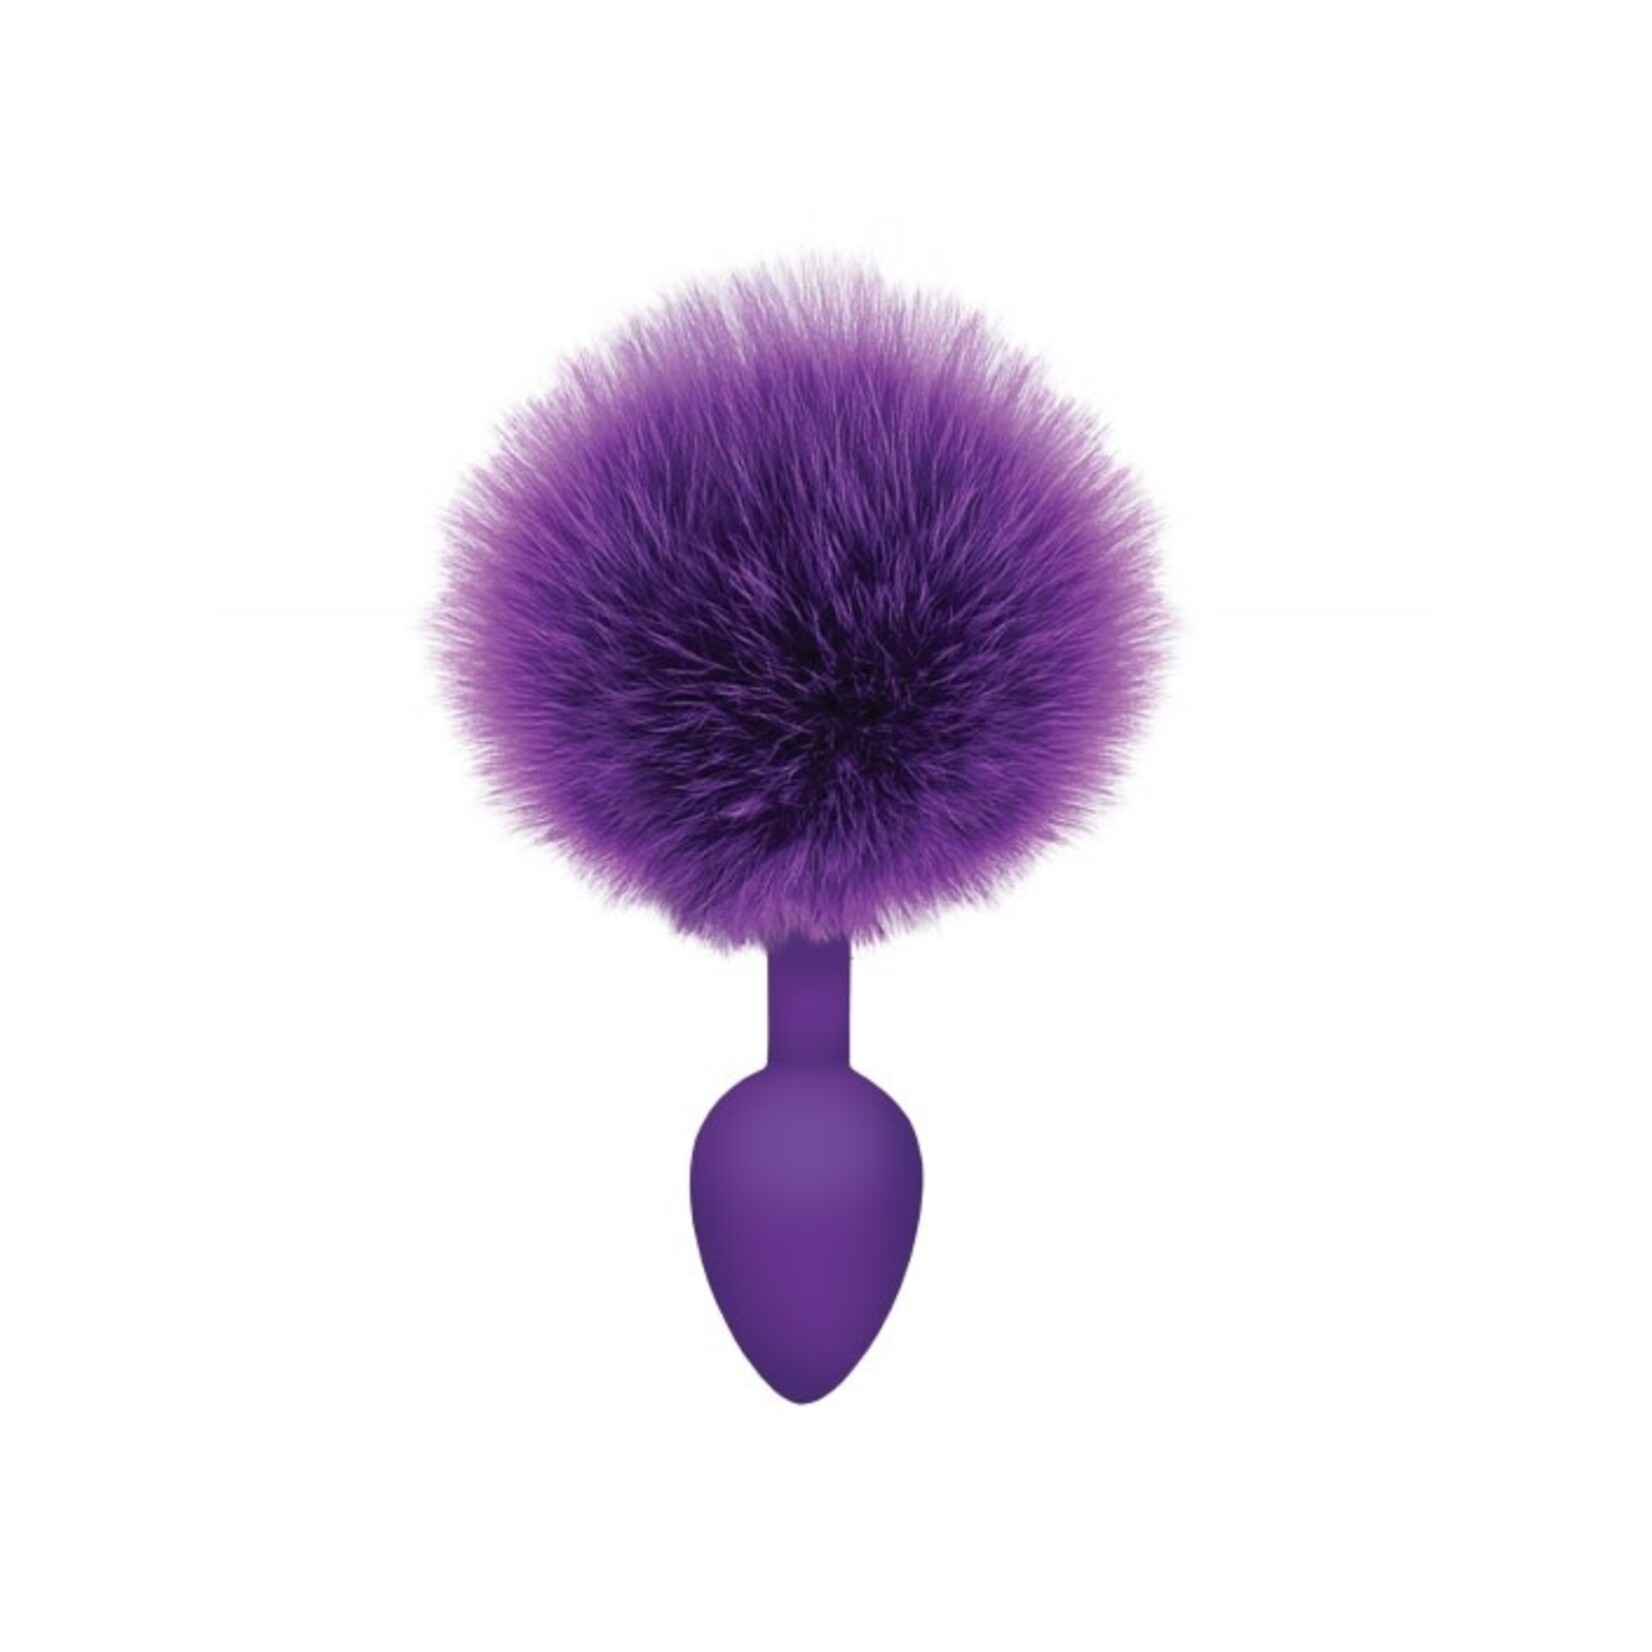 THE 9'S COTTONTAILS SILICONE BUNNY TAIL BUTT PLUG RIBBED PURPLE